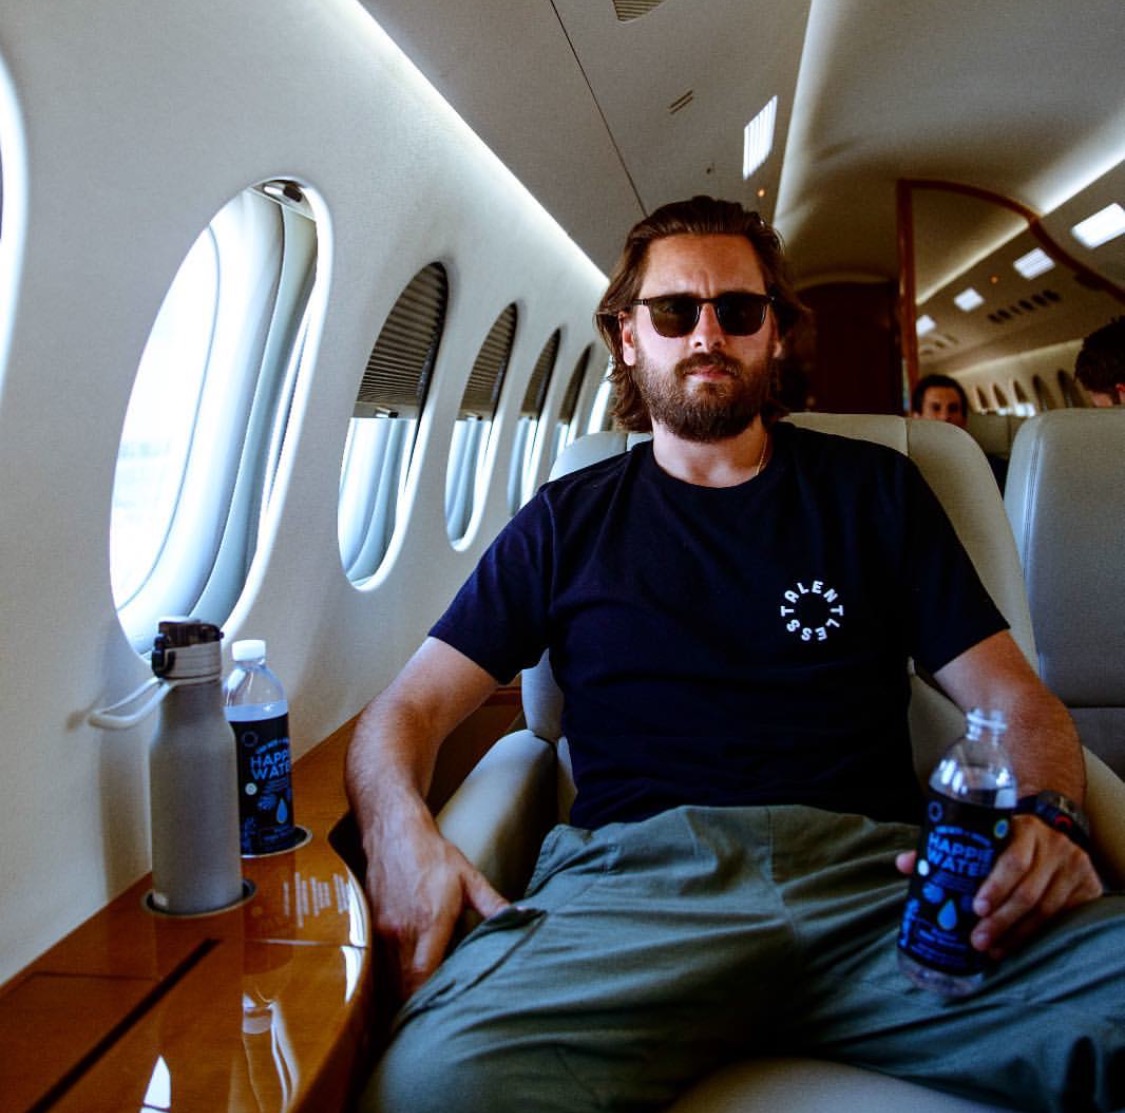 What to expect from Scott Disick’s reality TV show